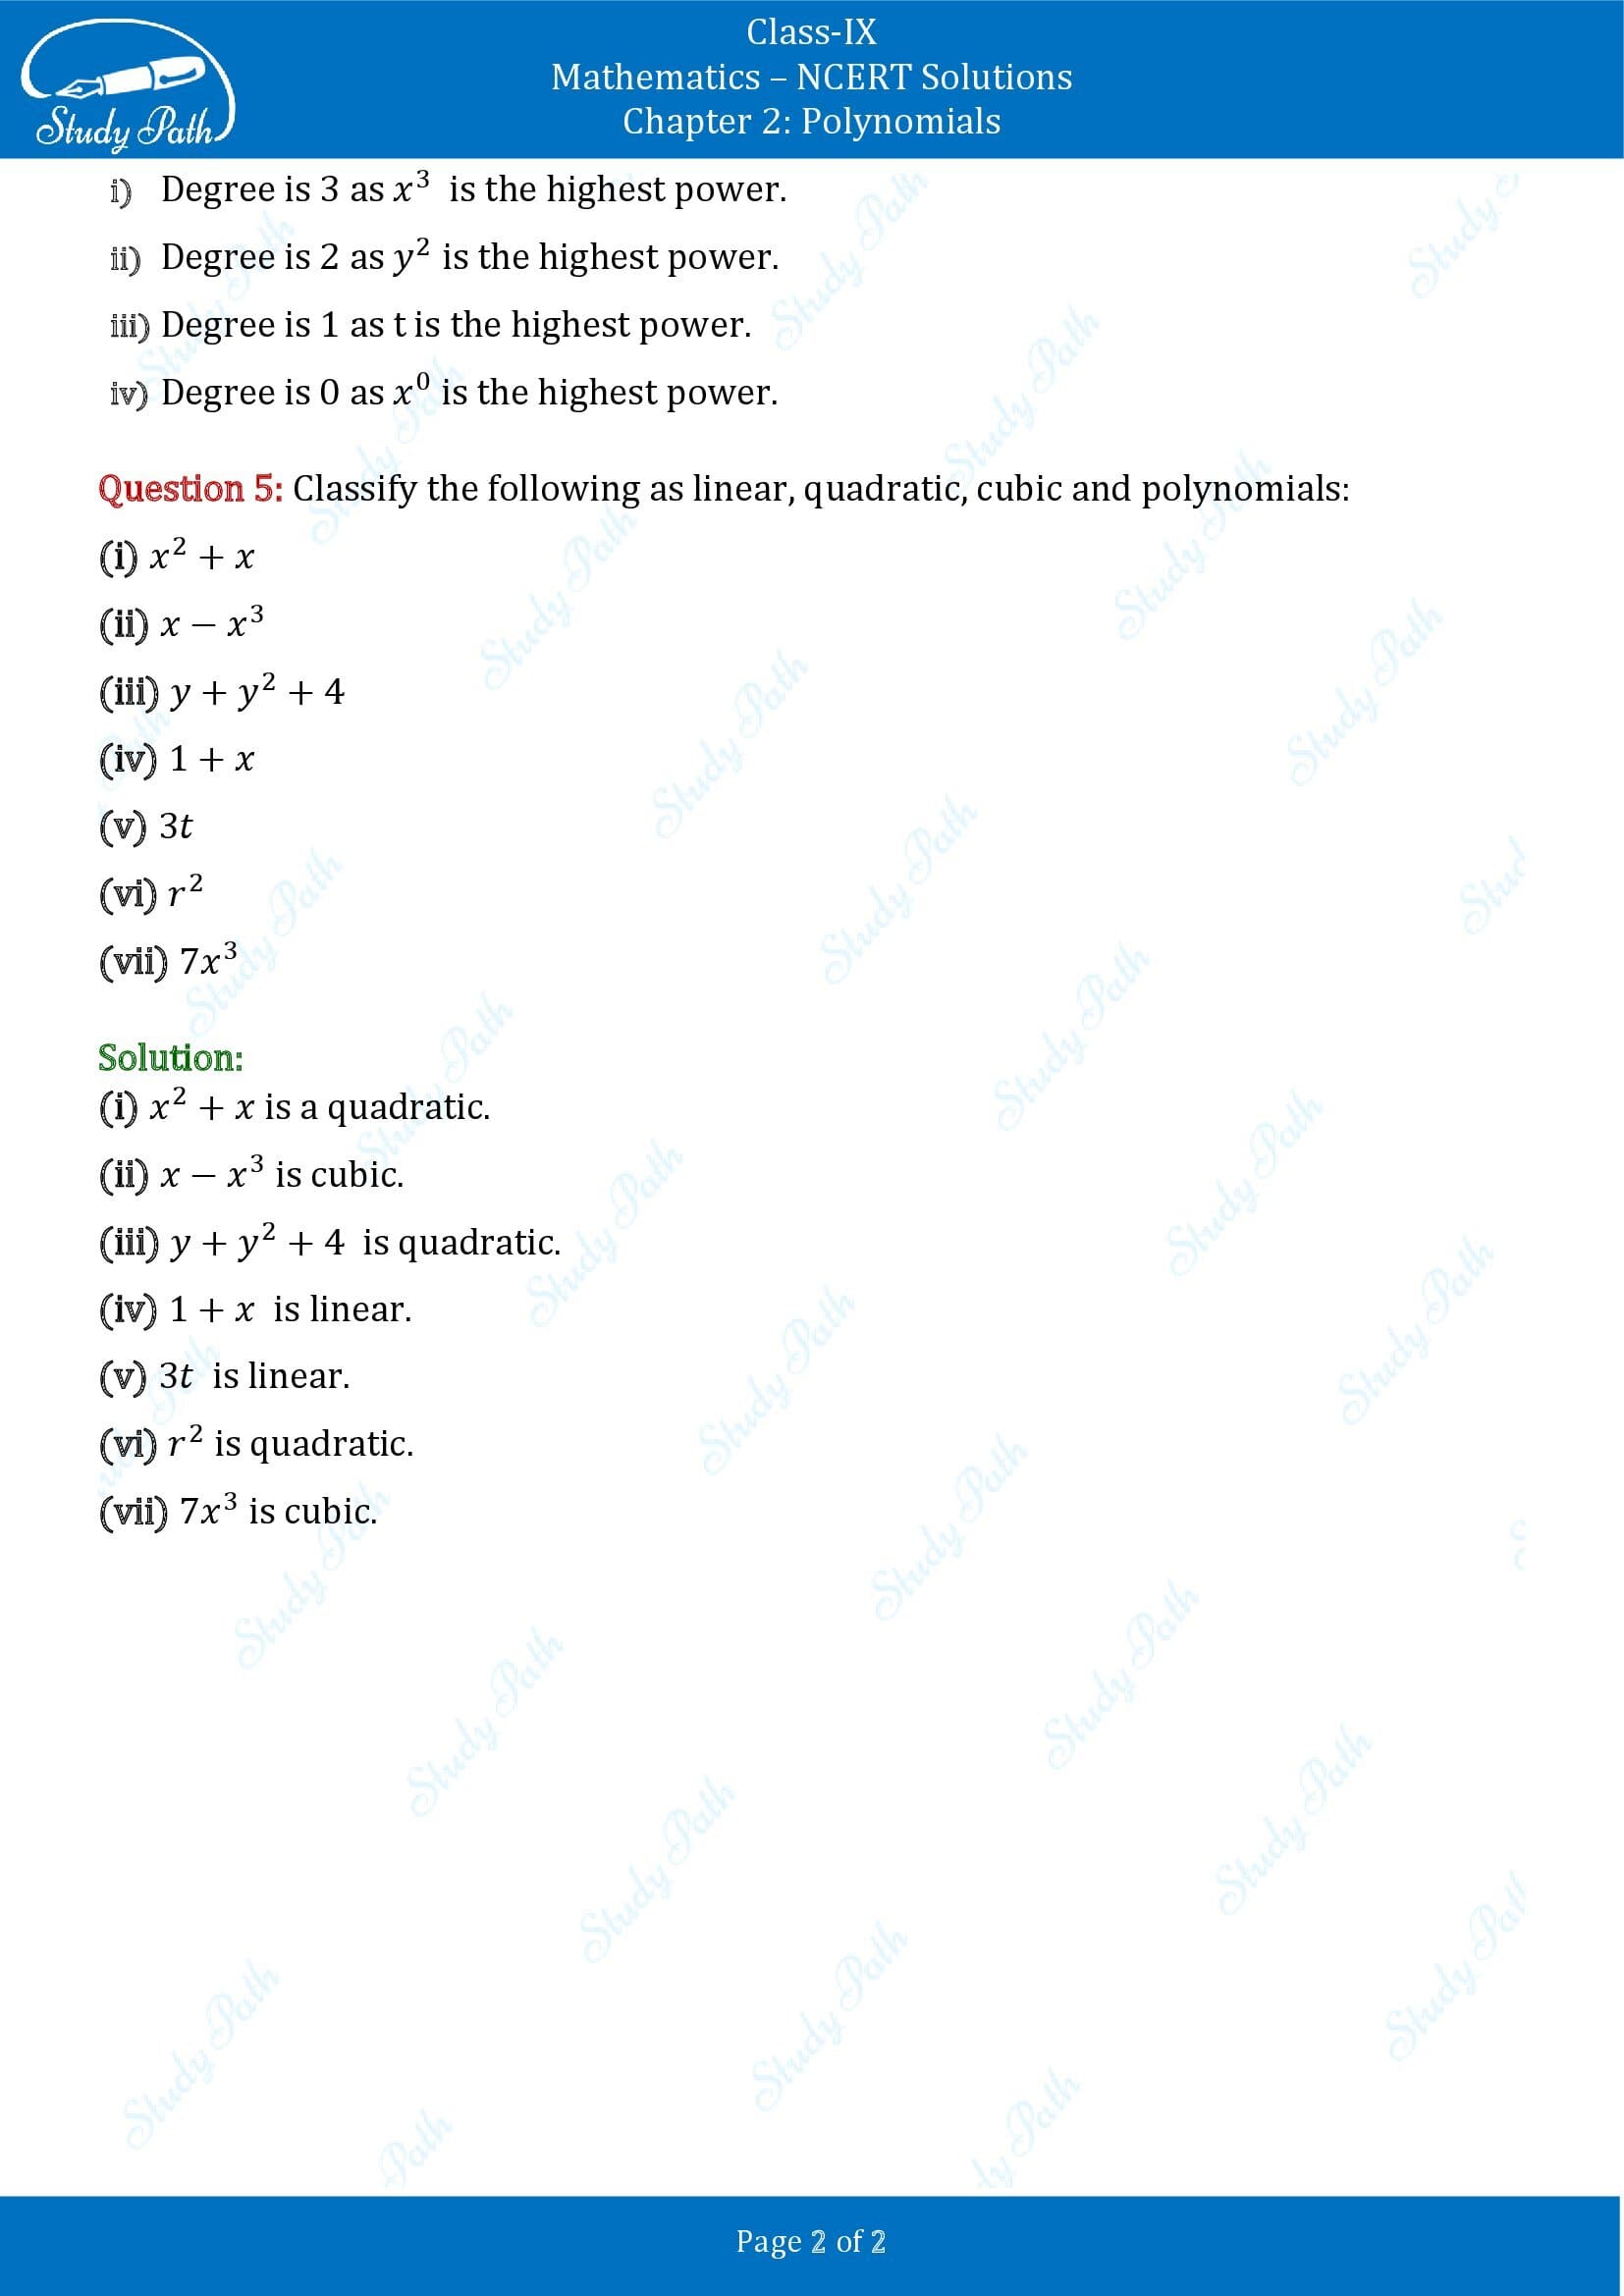 NCERT Solutions for Class 9 Maths Chapter 2 Polynomials Exercise 2.1 00002